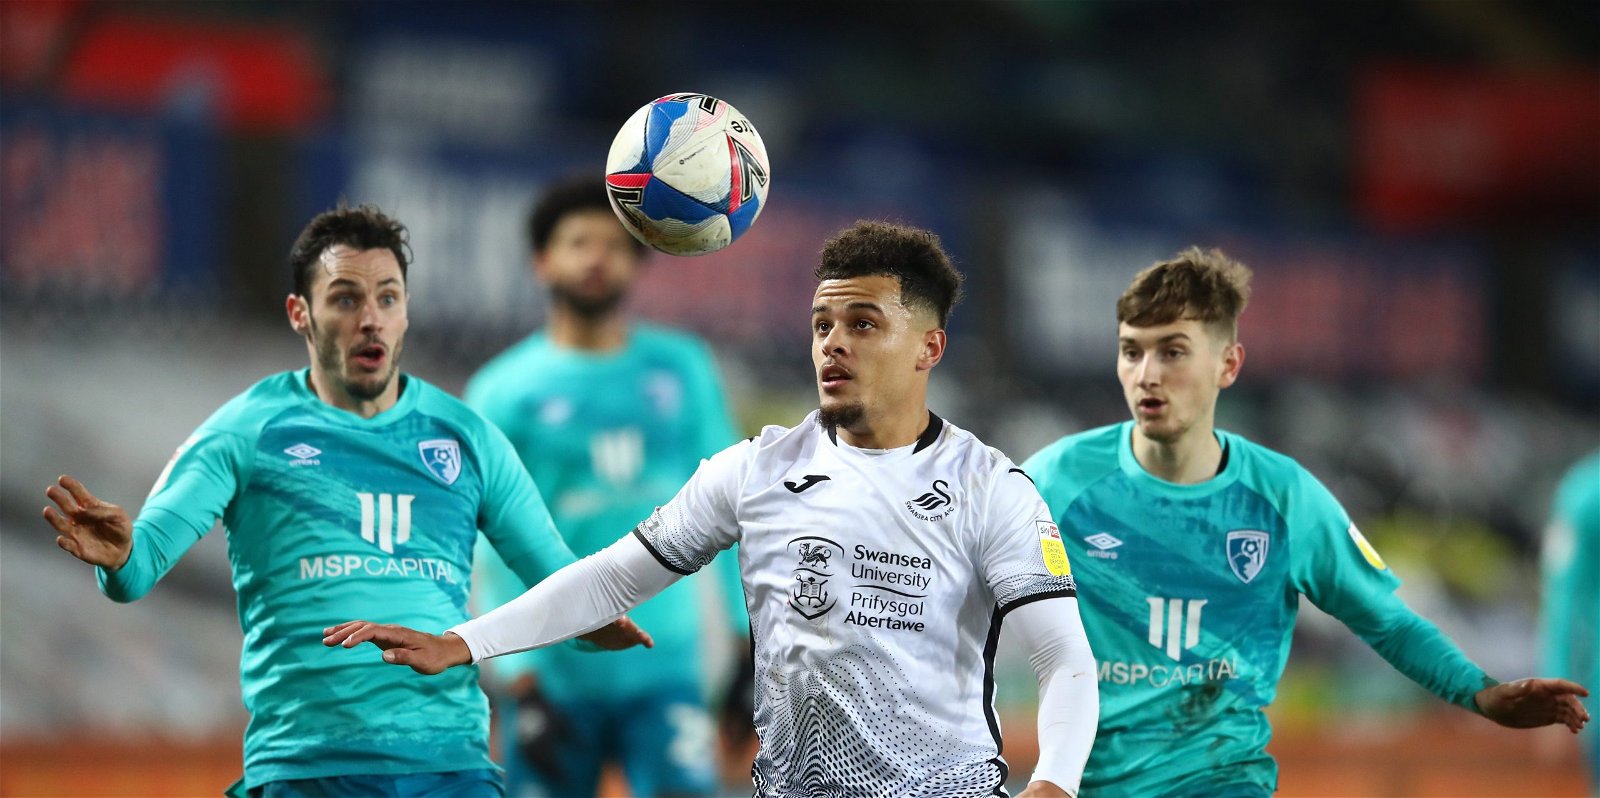 , &#8216;A good point&#8217;, &#8216;Loads of positives&#8217; &#8211; Plenty of Swansea City fans react after Bournemouth stalemate